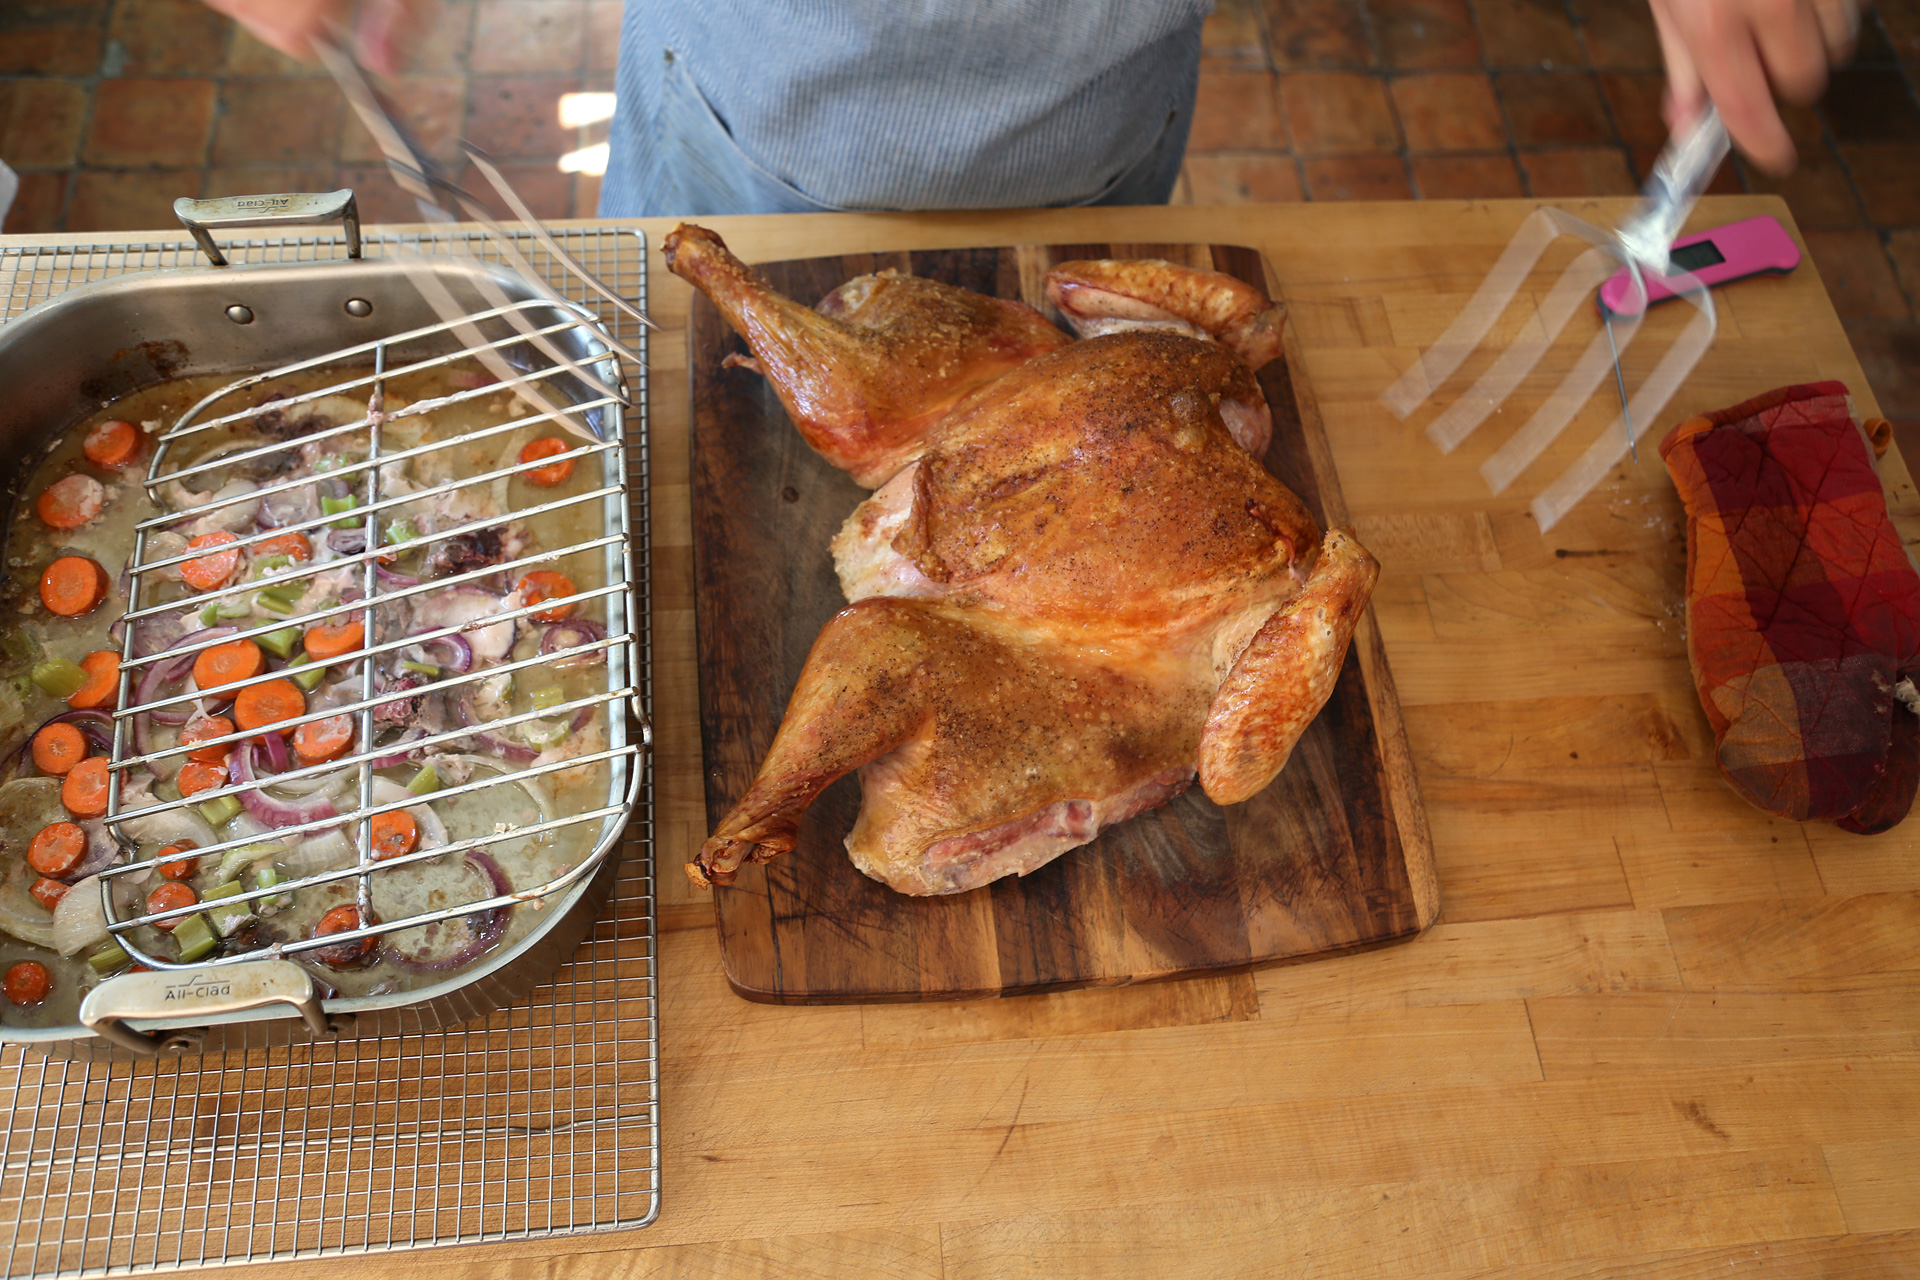 Remove from the oven and let rest for 10 minutes before carving and serving.